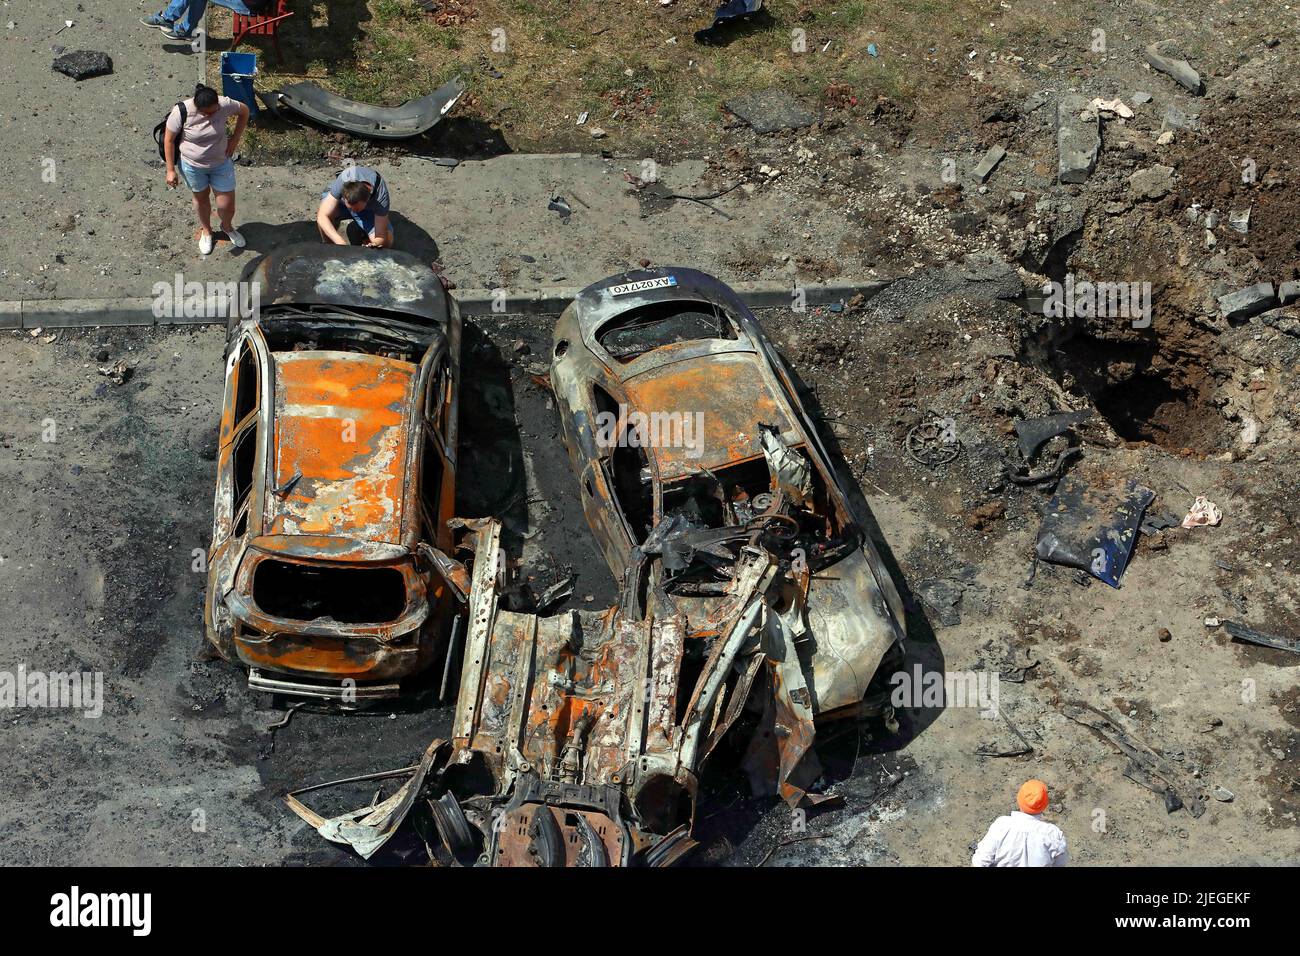 A crater is seen in the ground near burnt-out cars after the Russian troops attacked a northern neighbourhood with a BM-30 Smerch multiple rocket launcher, Kharkiv, northeastern Ukraine, June 26, 2022. Photo by Vyacheslav Madiyevskyy/Ukrinform/ABACAPRESS.COM Stock Photo